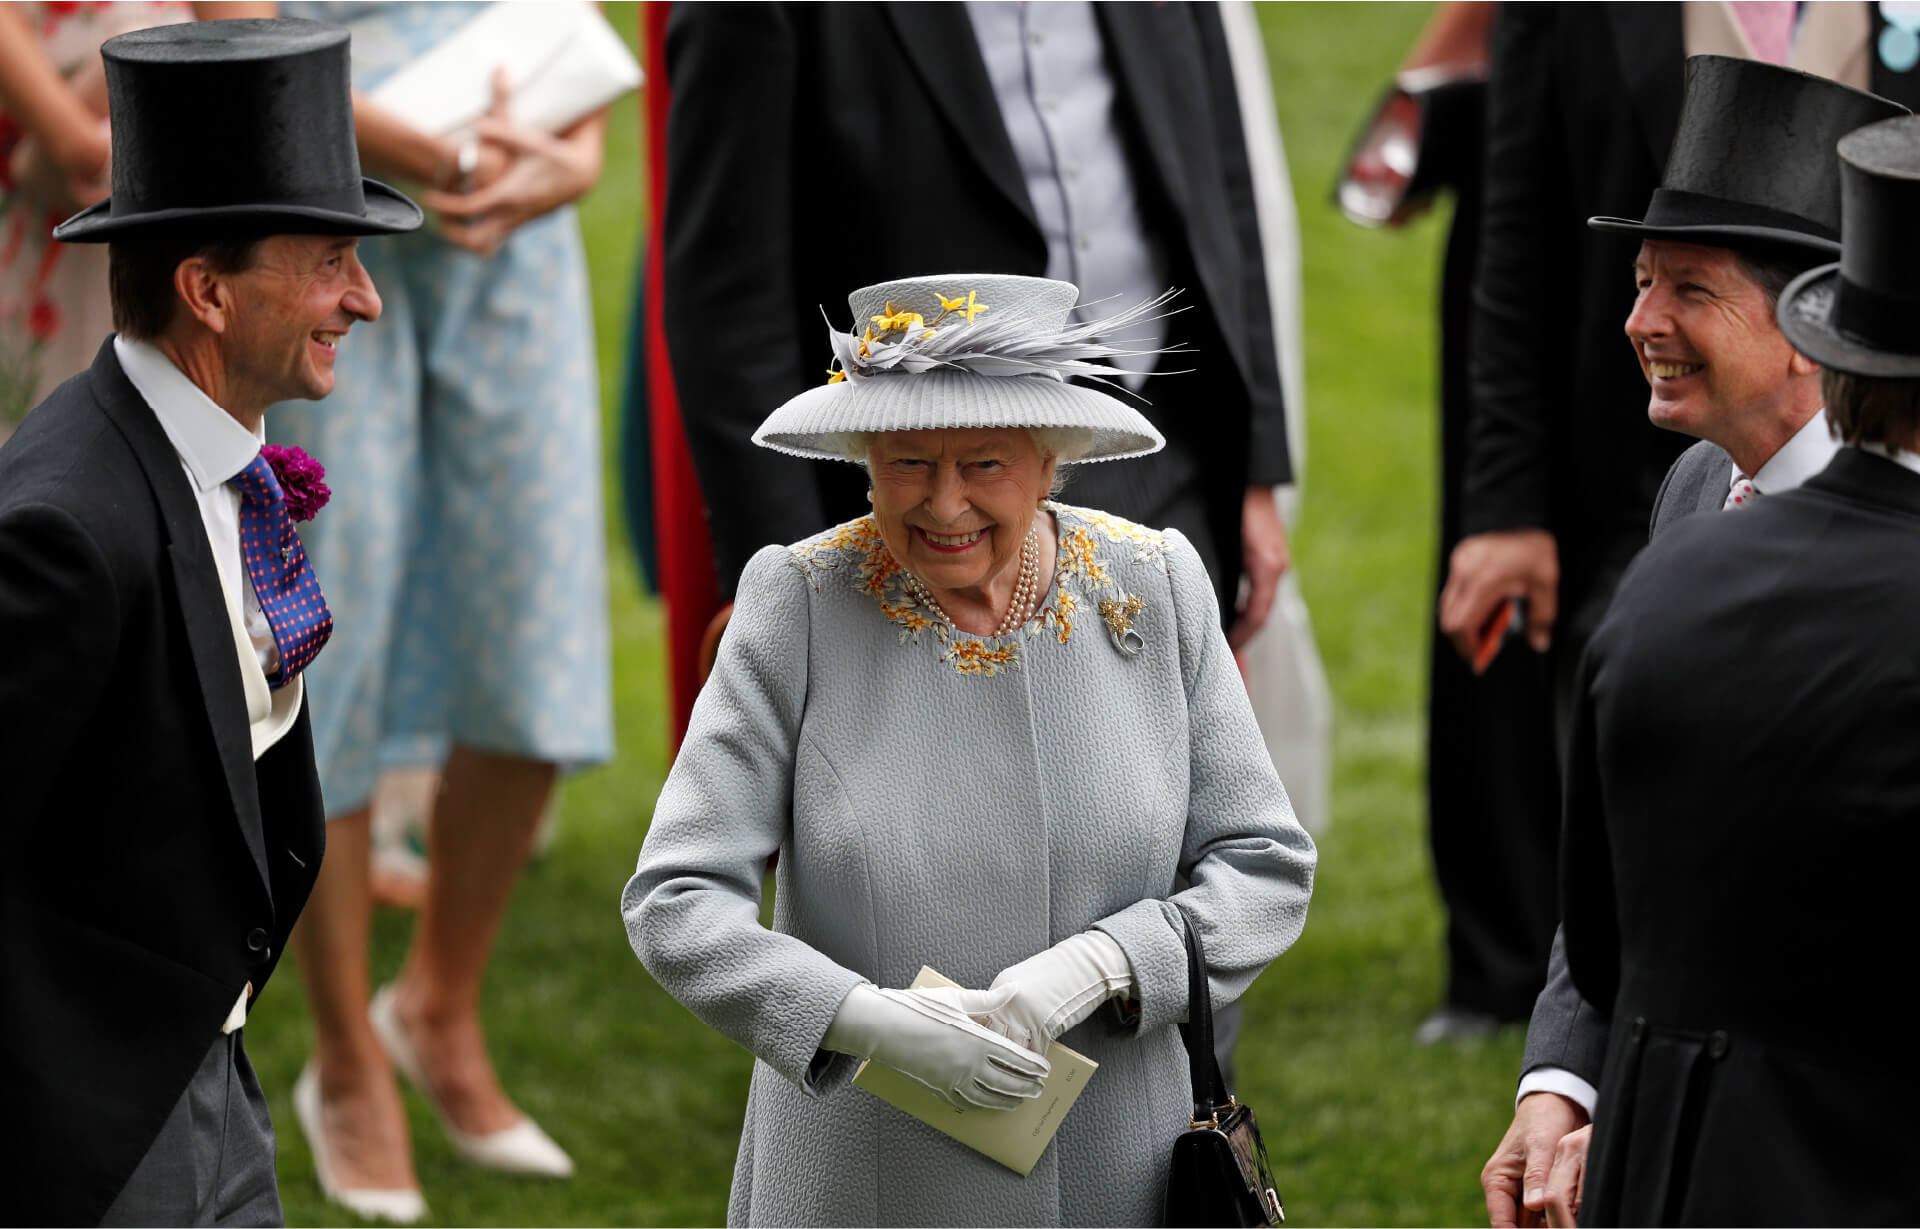 Queen Elizabeth wears a gray coat embroidered with yellow flowers around the collar, with a matching medium-brimmed gray hat decorated with feathers and yellow flowers. She is surrounded by men with black top hats and tails.